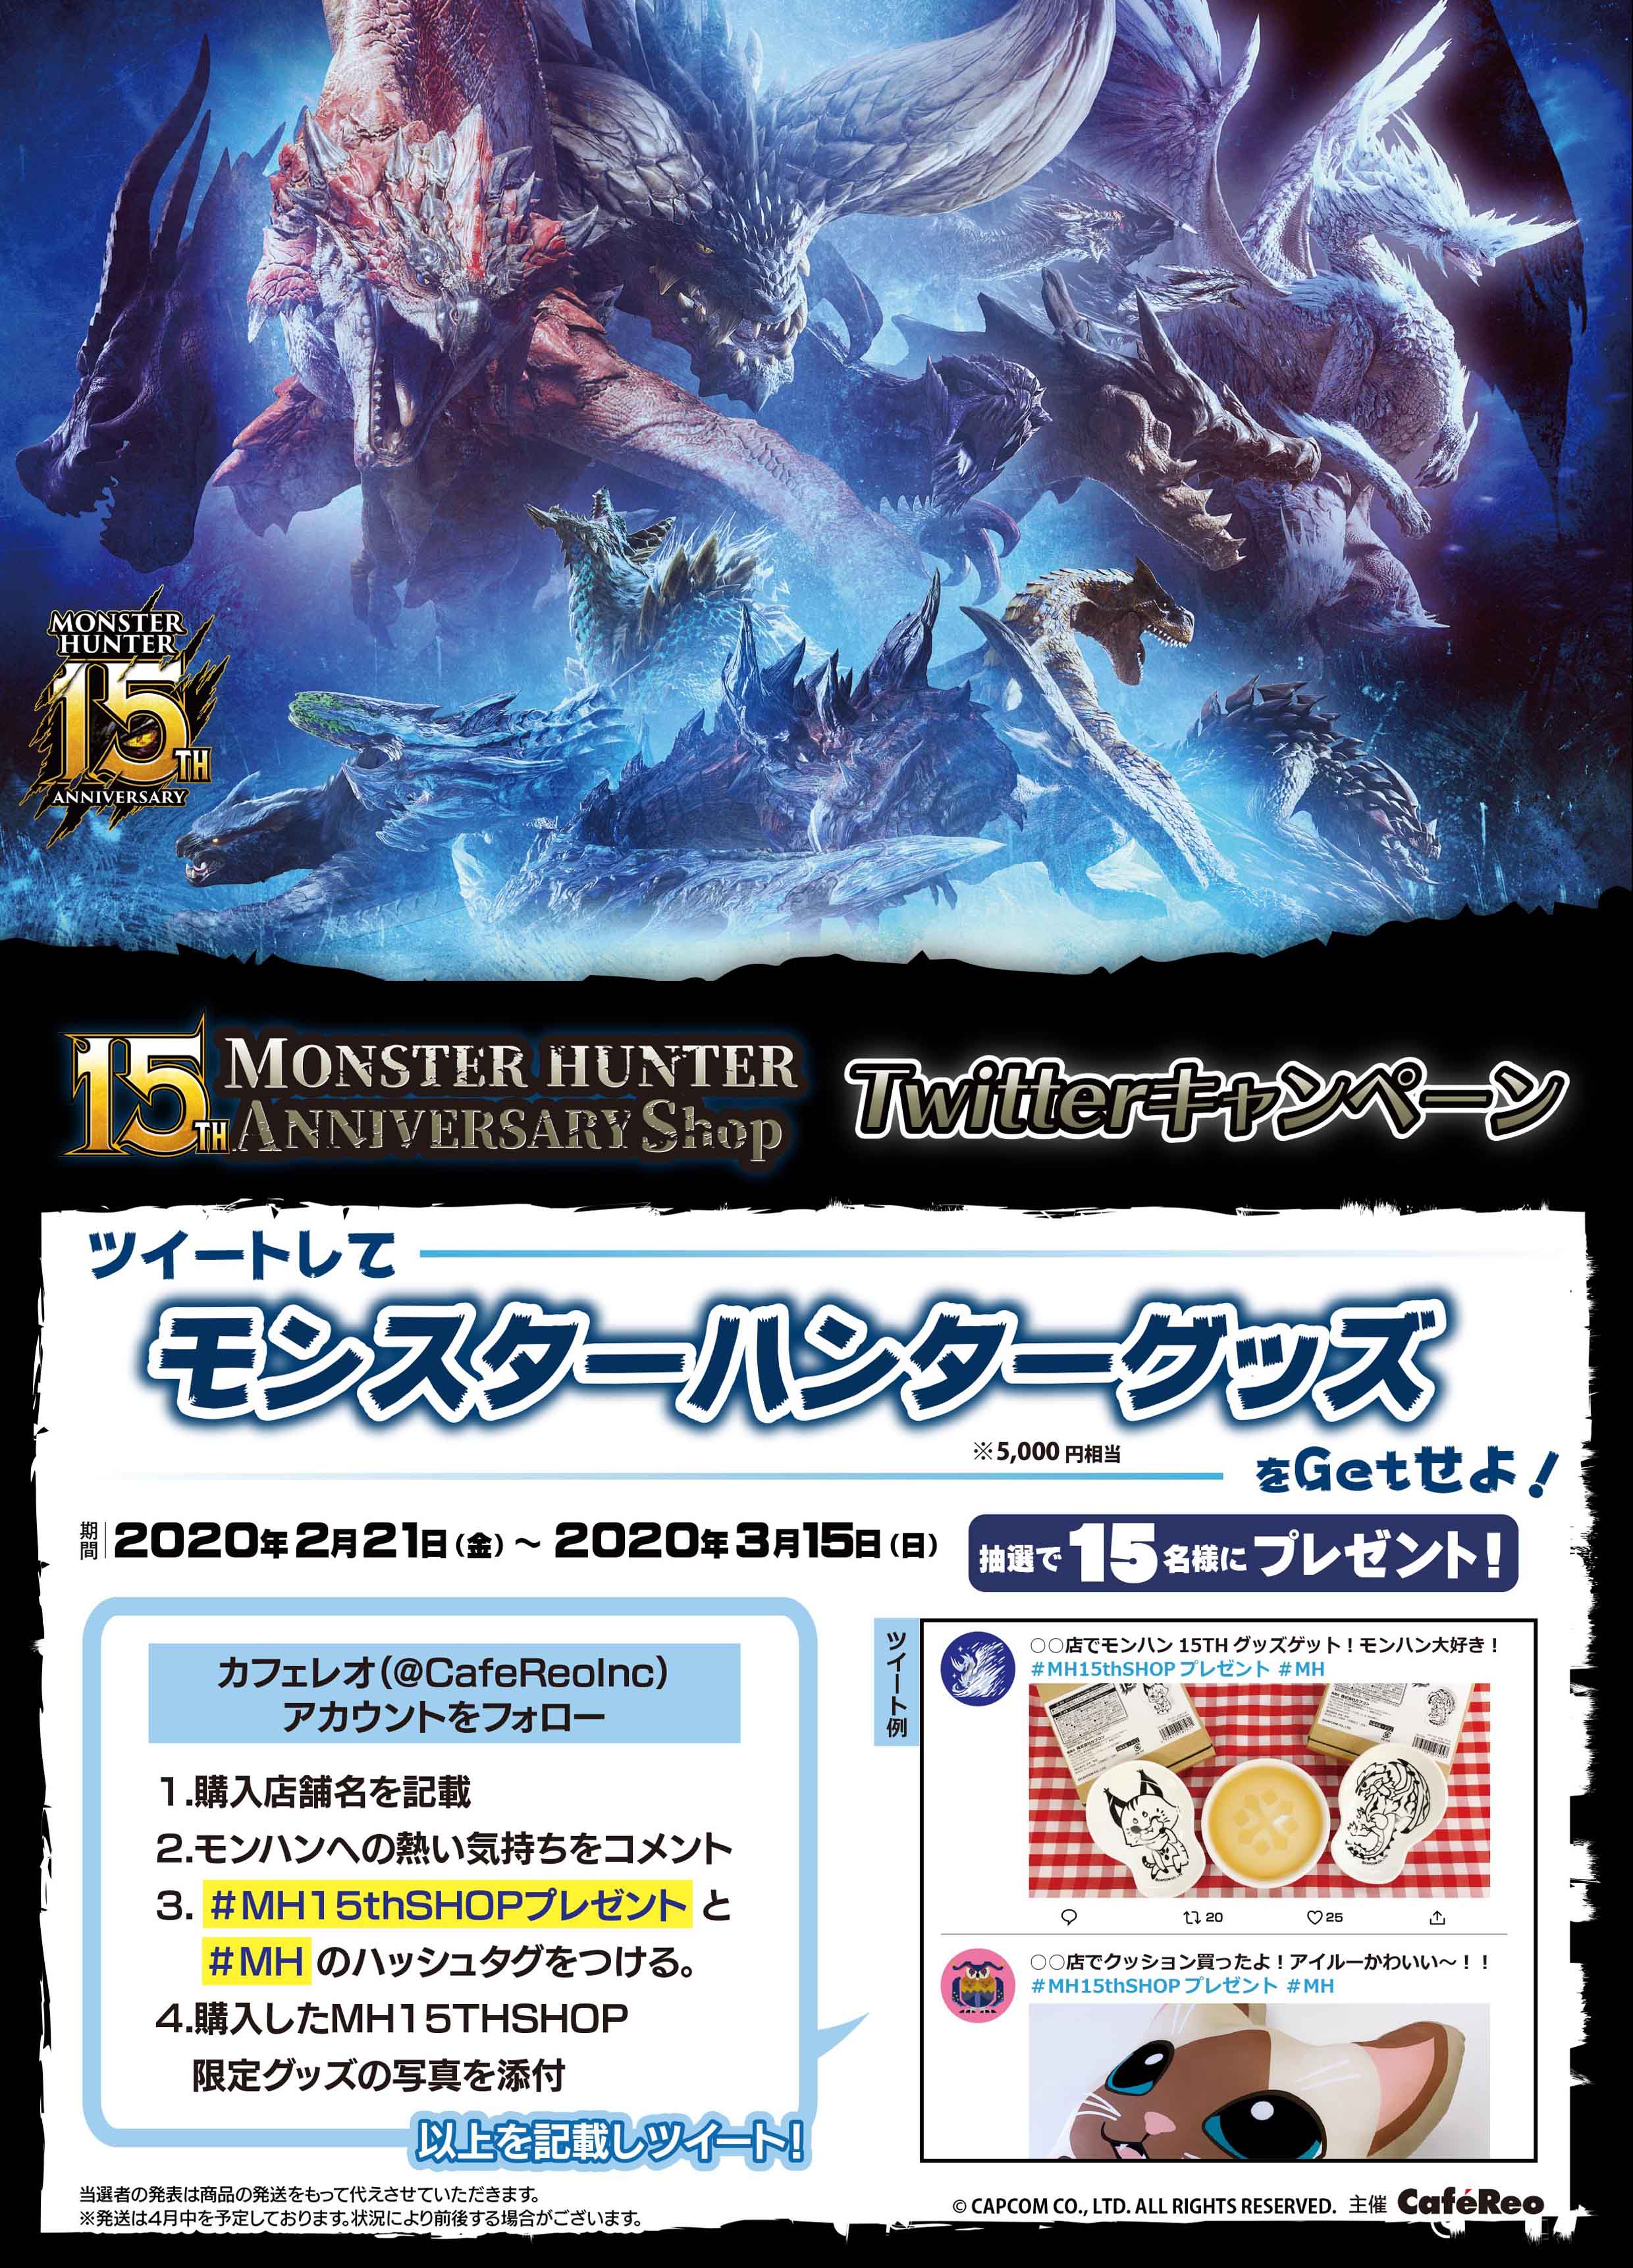 MONSTER HUNTER 15TH ANNIVERSARY Shop | cafereo